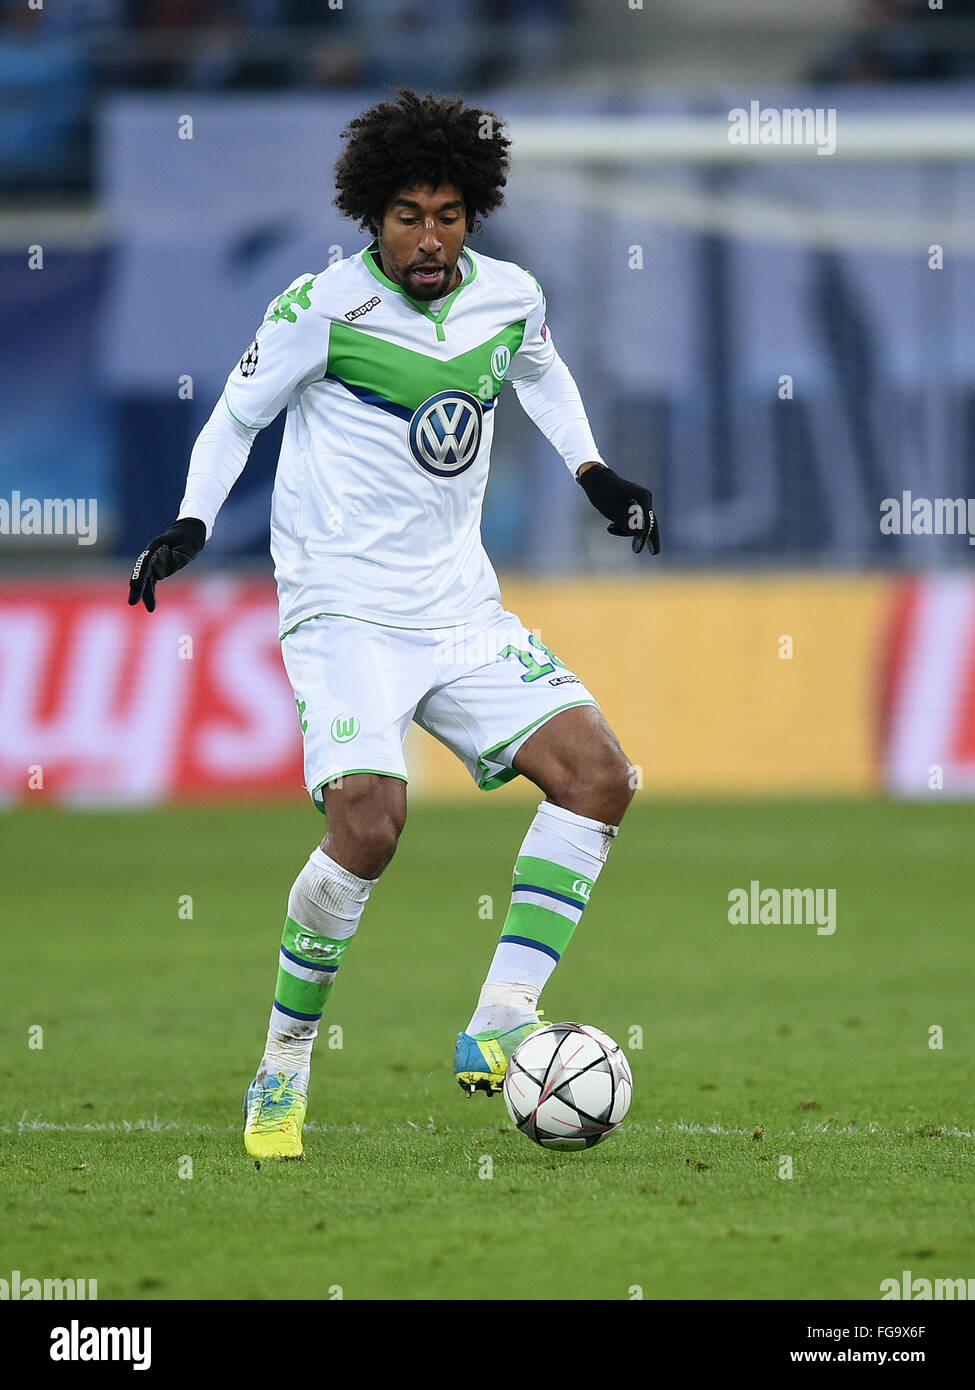 Ghent, Belgium. 17th Feb, 2016. Wolfsburg's Dante controls the ball during  the UEFA Champions League Round of 16 match between KAA Gent - VfL  Wolfsburg, at Ghelamco Arena stadium in Ghent, Belgium,